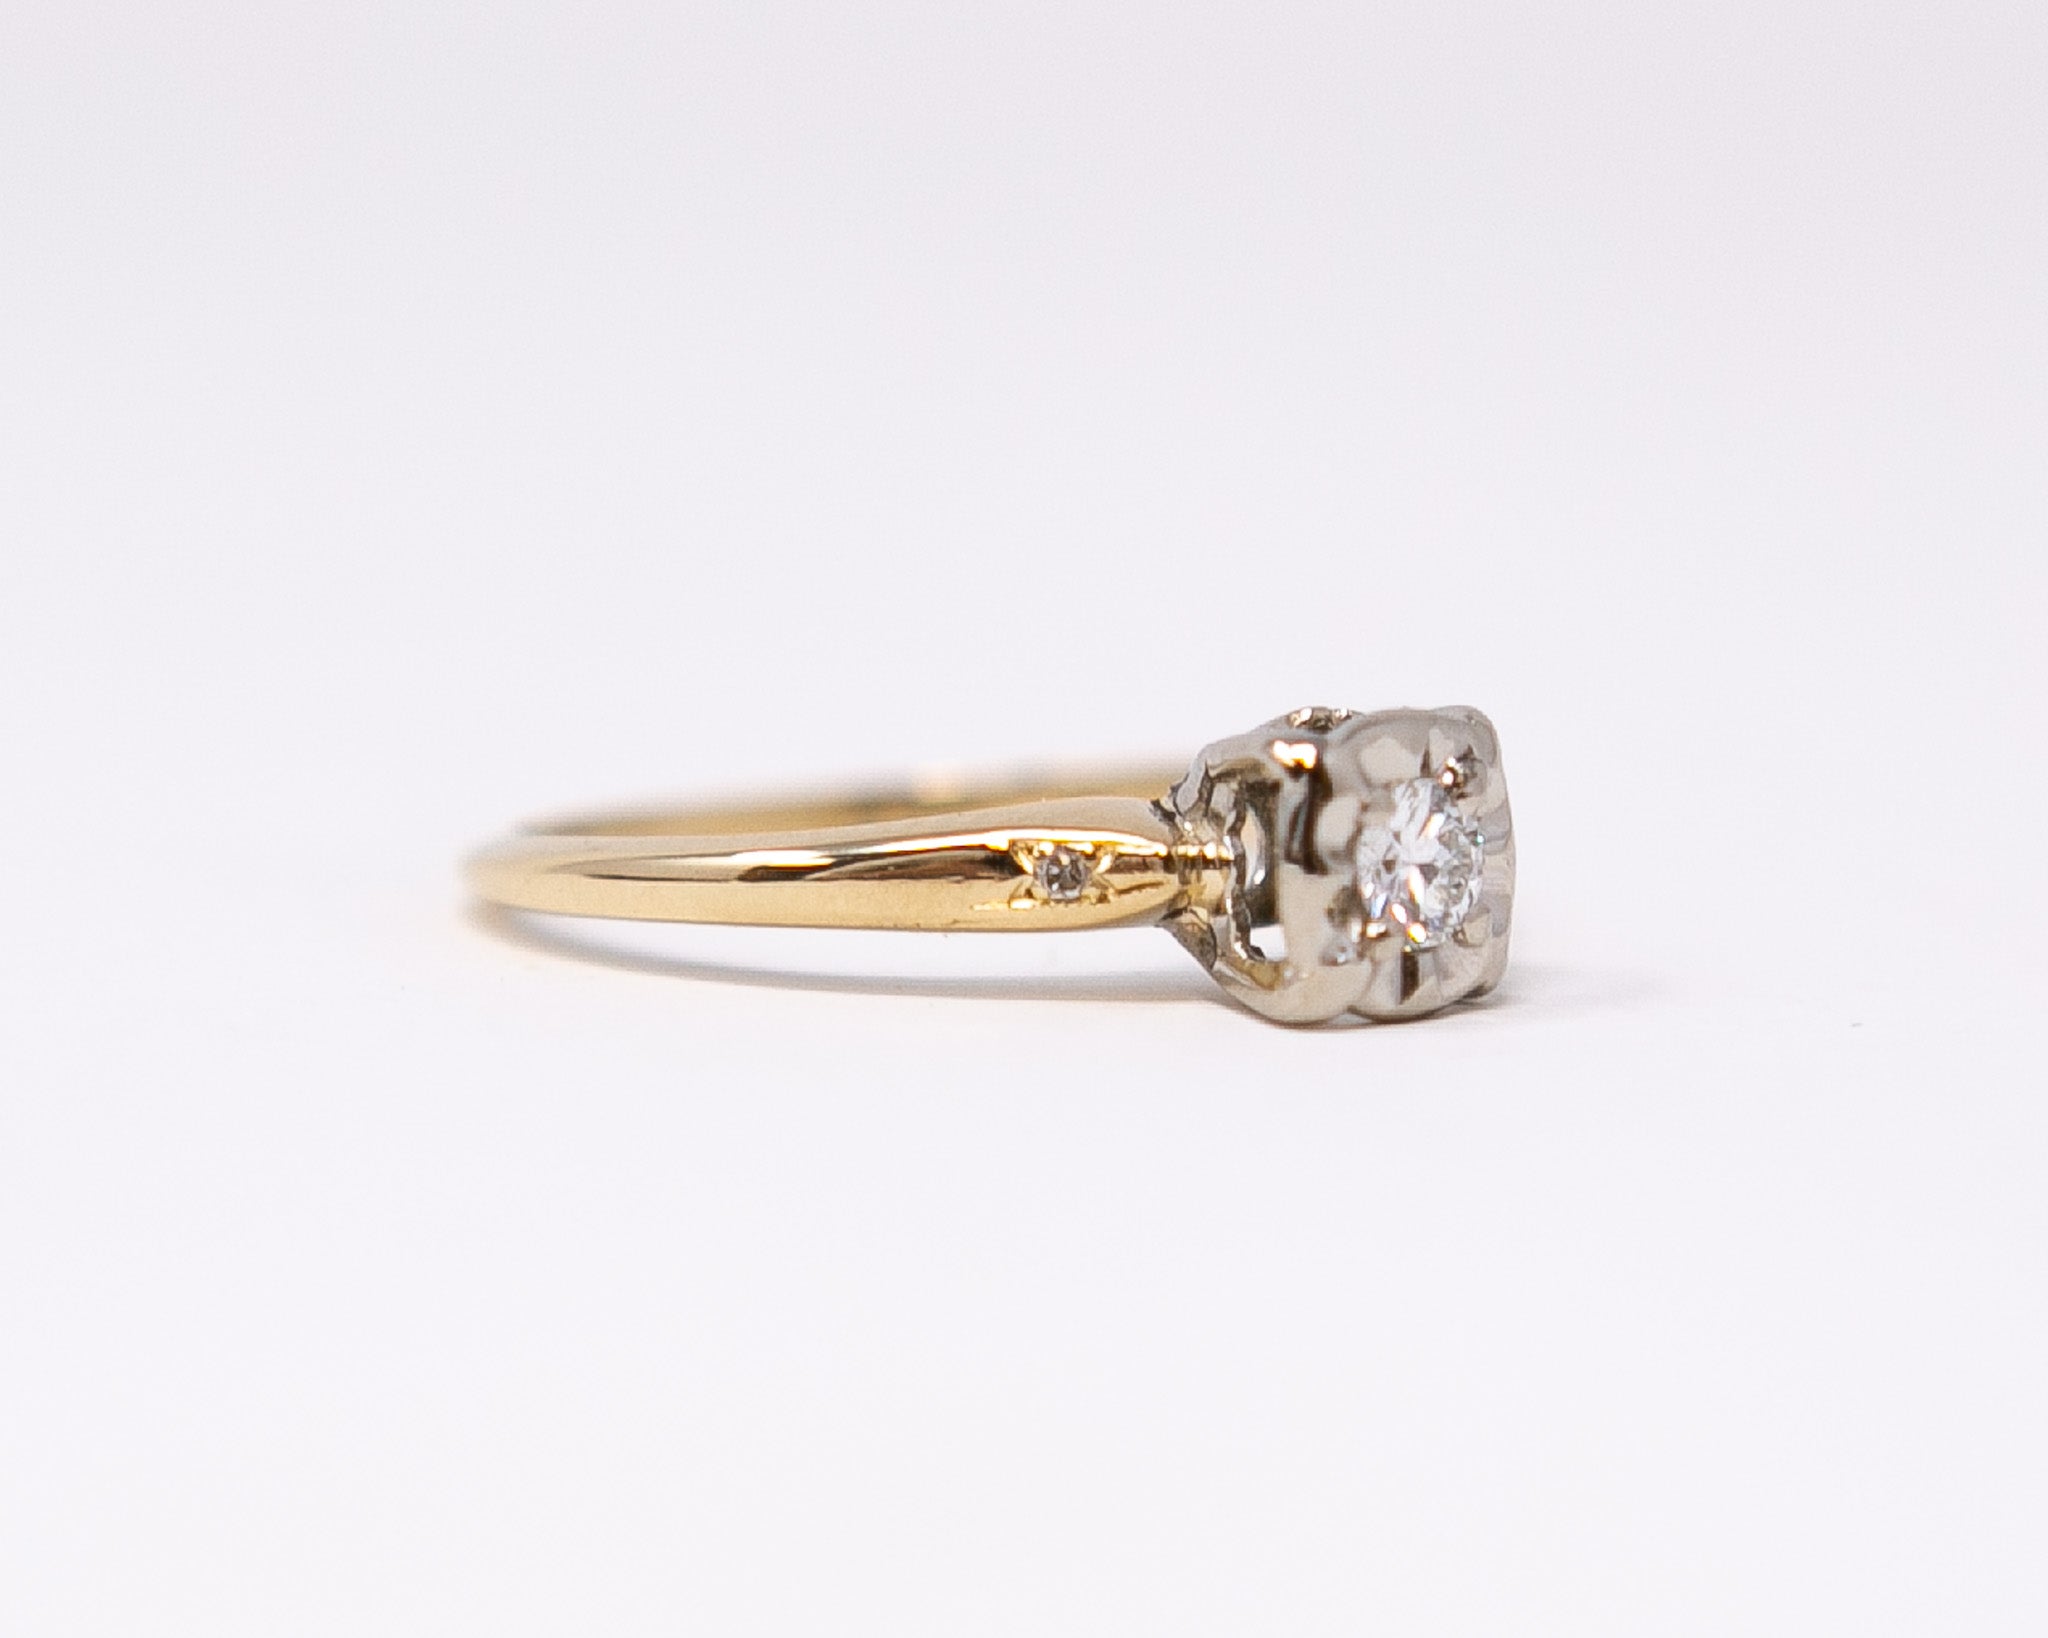 10 reasons to choose an antique engagement ring.